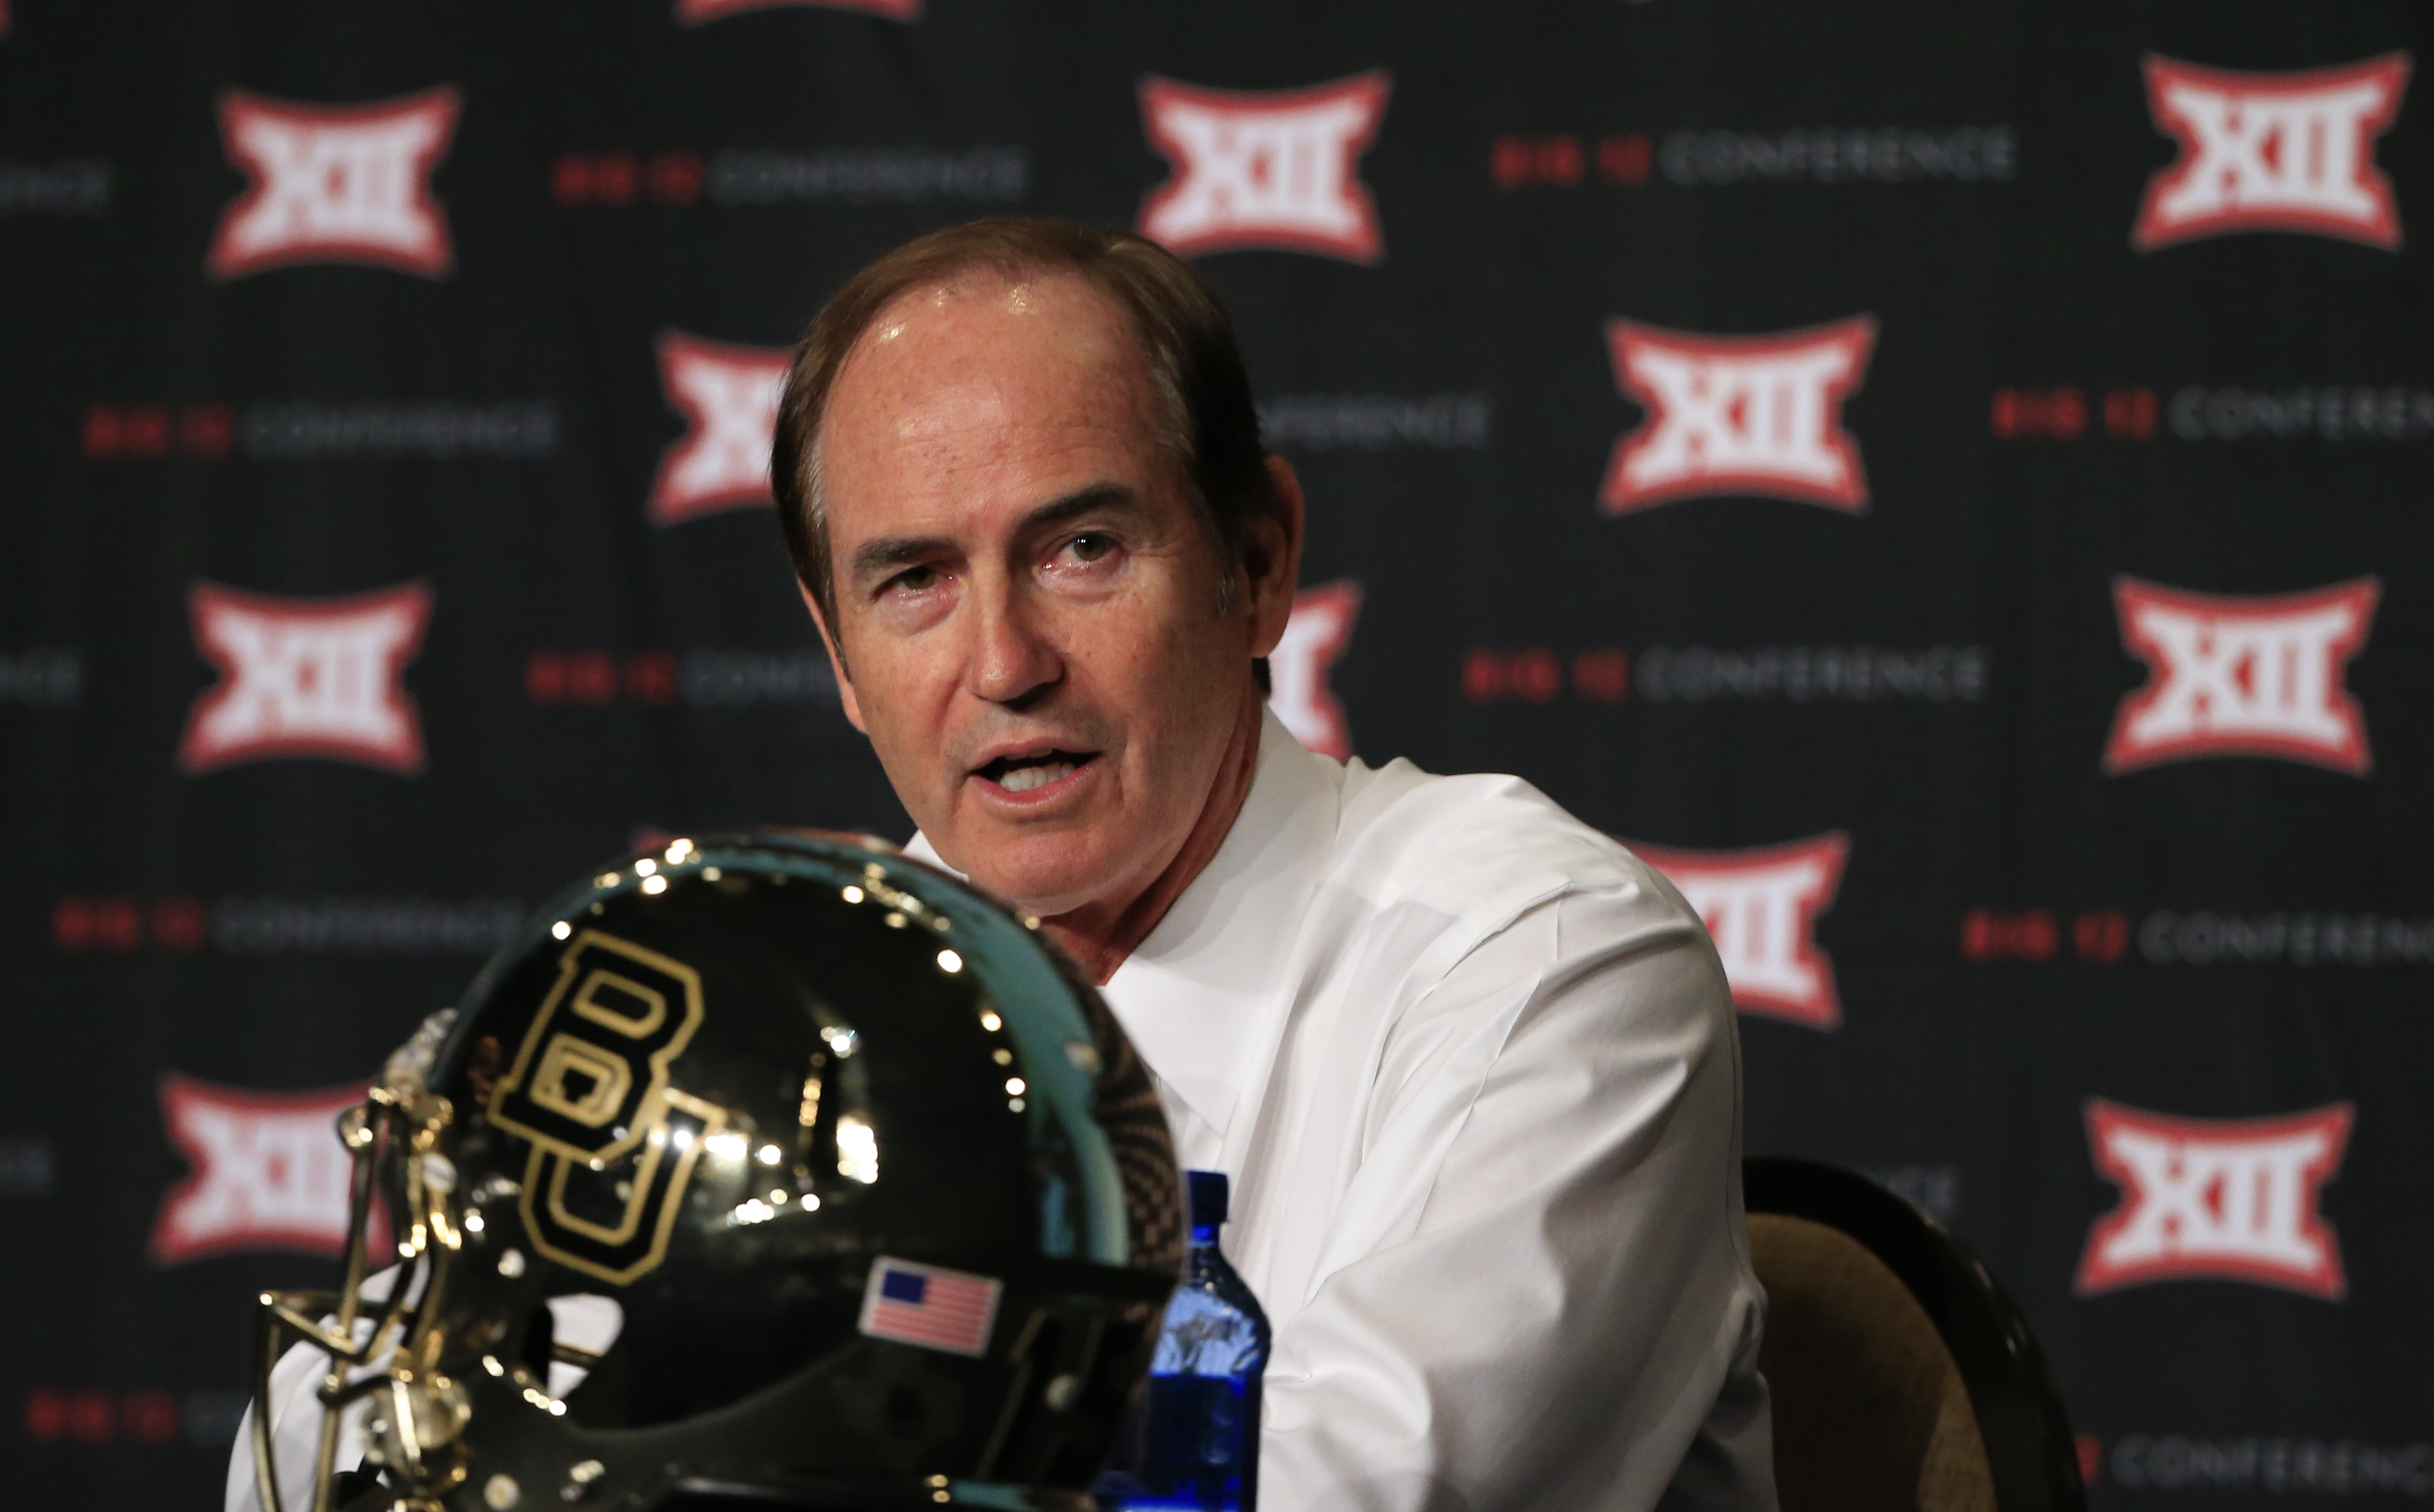 You can't tell here, but Art Briles is angry and out to prove himself